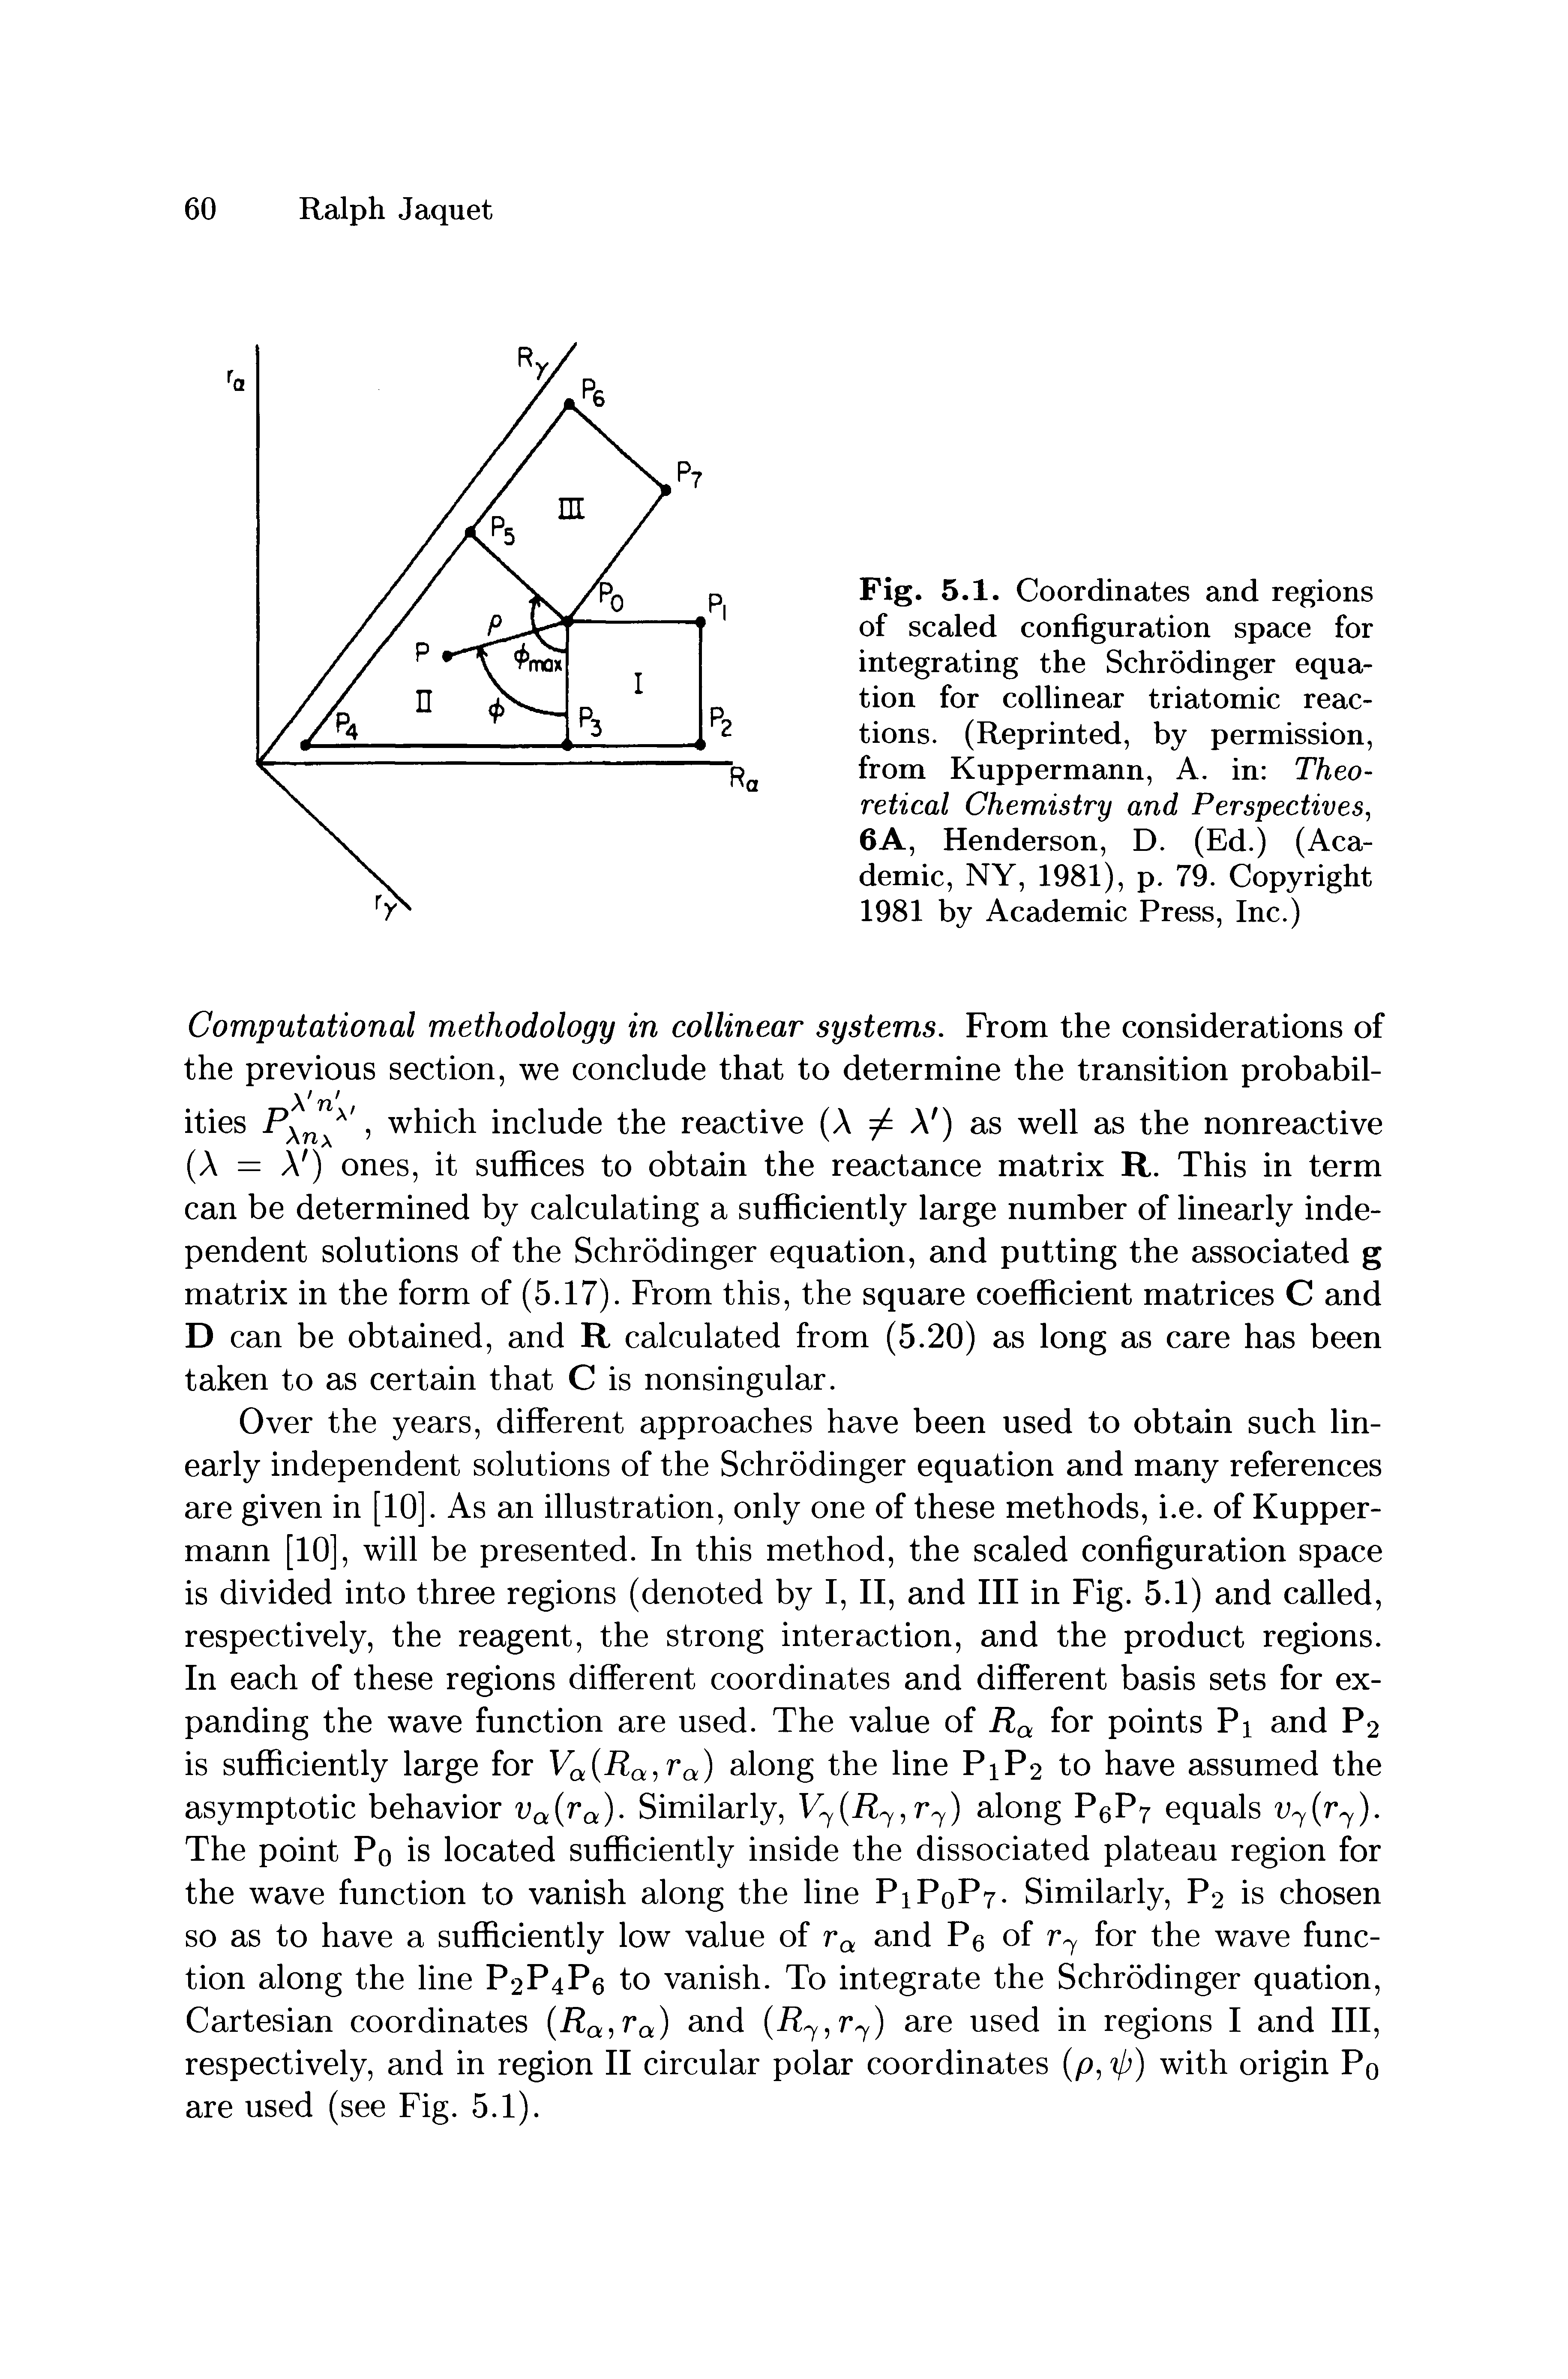 Fig. 5.1. Coordinates and regions of scaled configuration space for integrating the Schrodinger equation for collinear triatomic reactions. (Reprinted, by permission, from Kuppermann, A, in Theoretical Chemistry and Perspectives, 6A, Henderson, D. (Ed.) (Academic, NY, 1981), p. 79. Copyright 1981 by Academic Press, Inc.)...